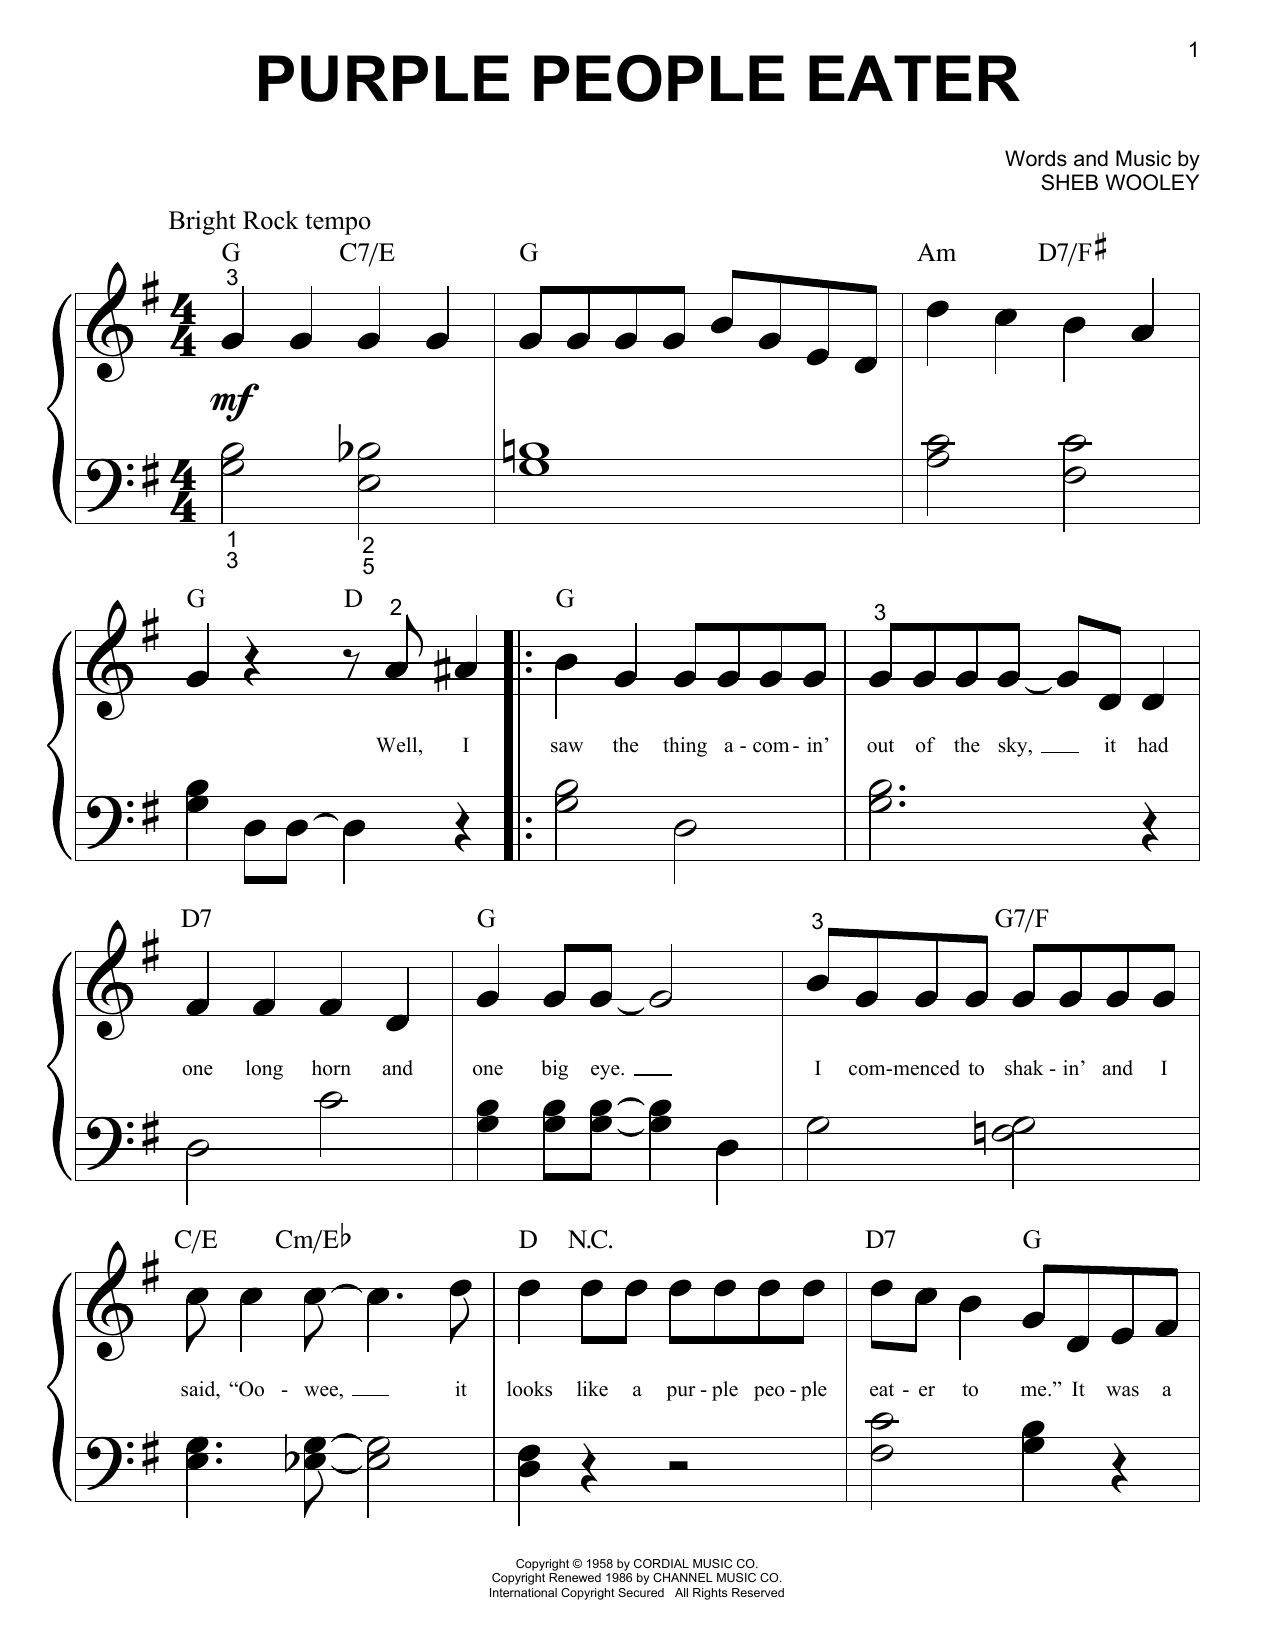 Download Sheb Wooley Purple People Eater Sheet Music